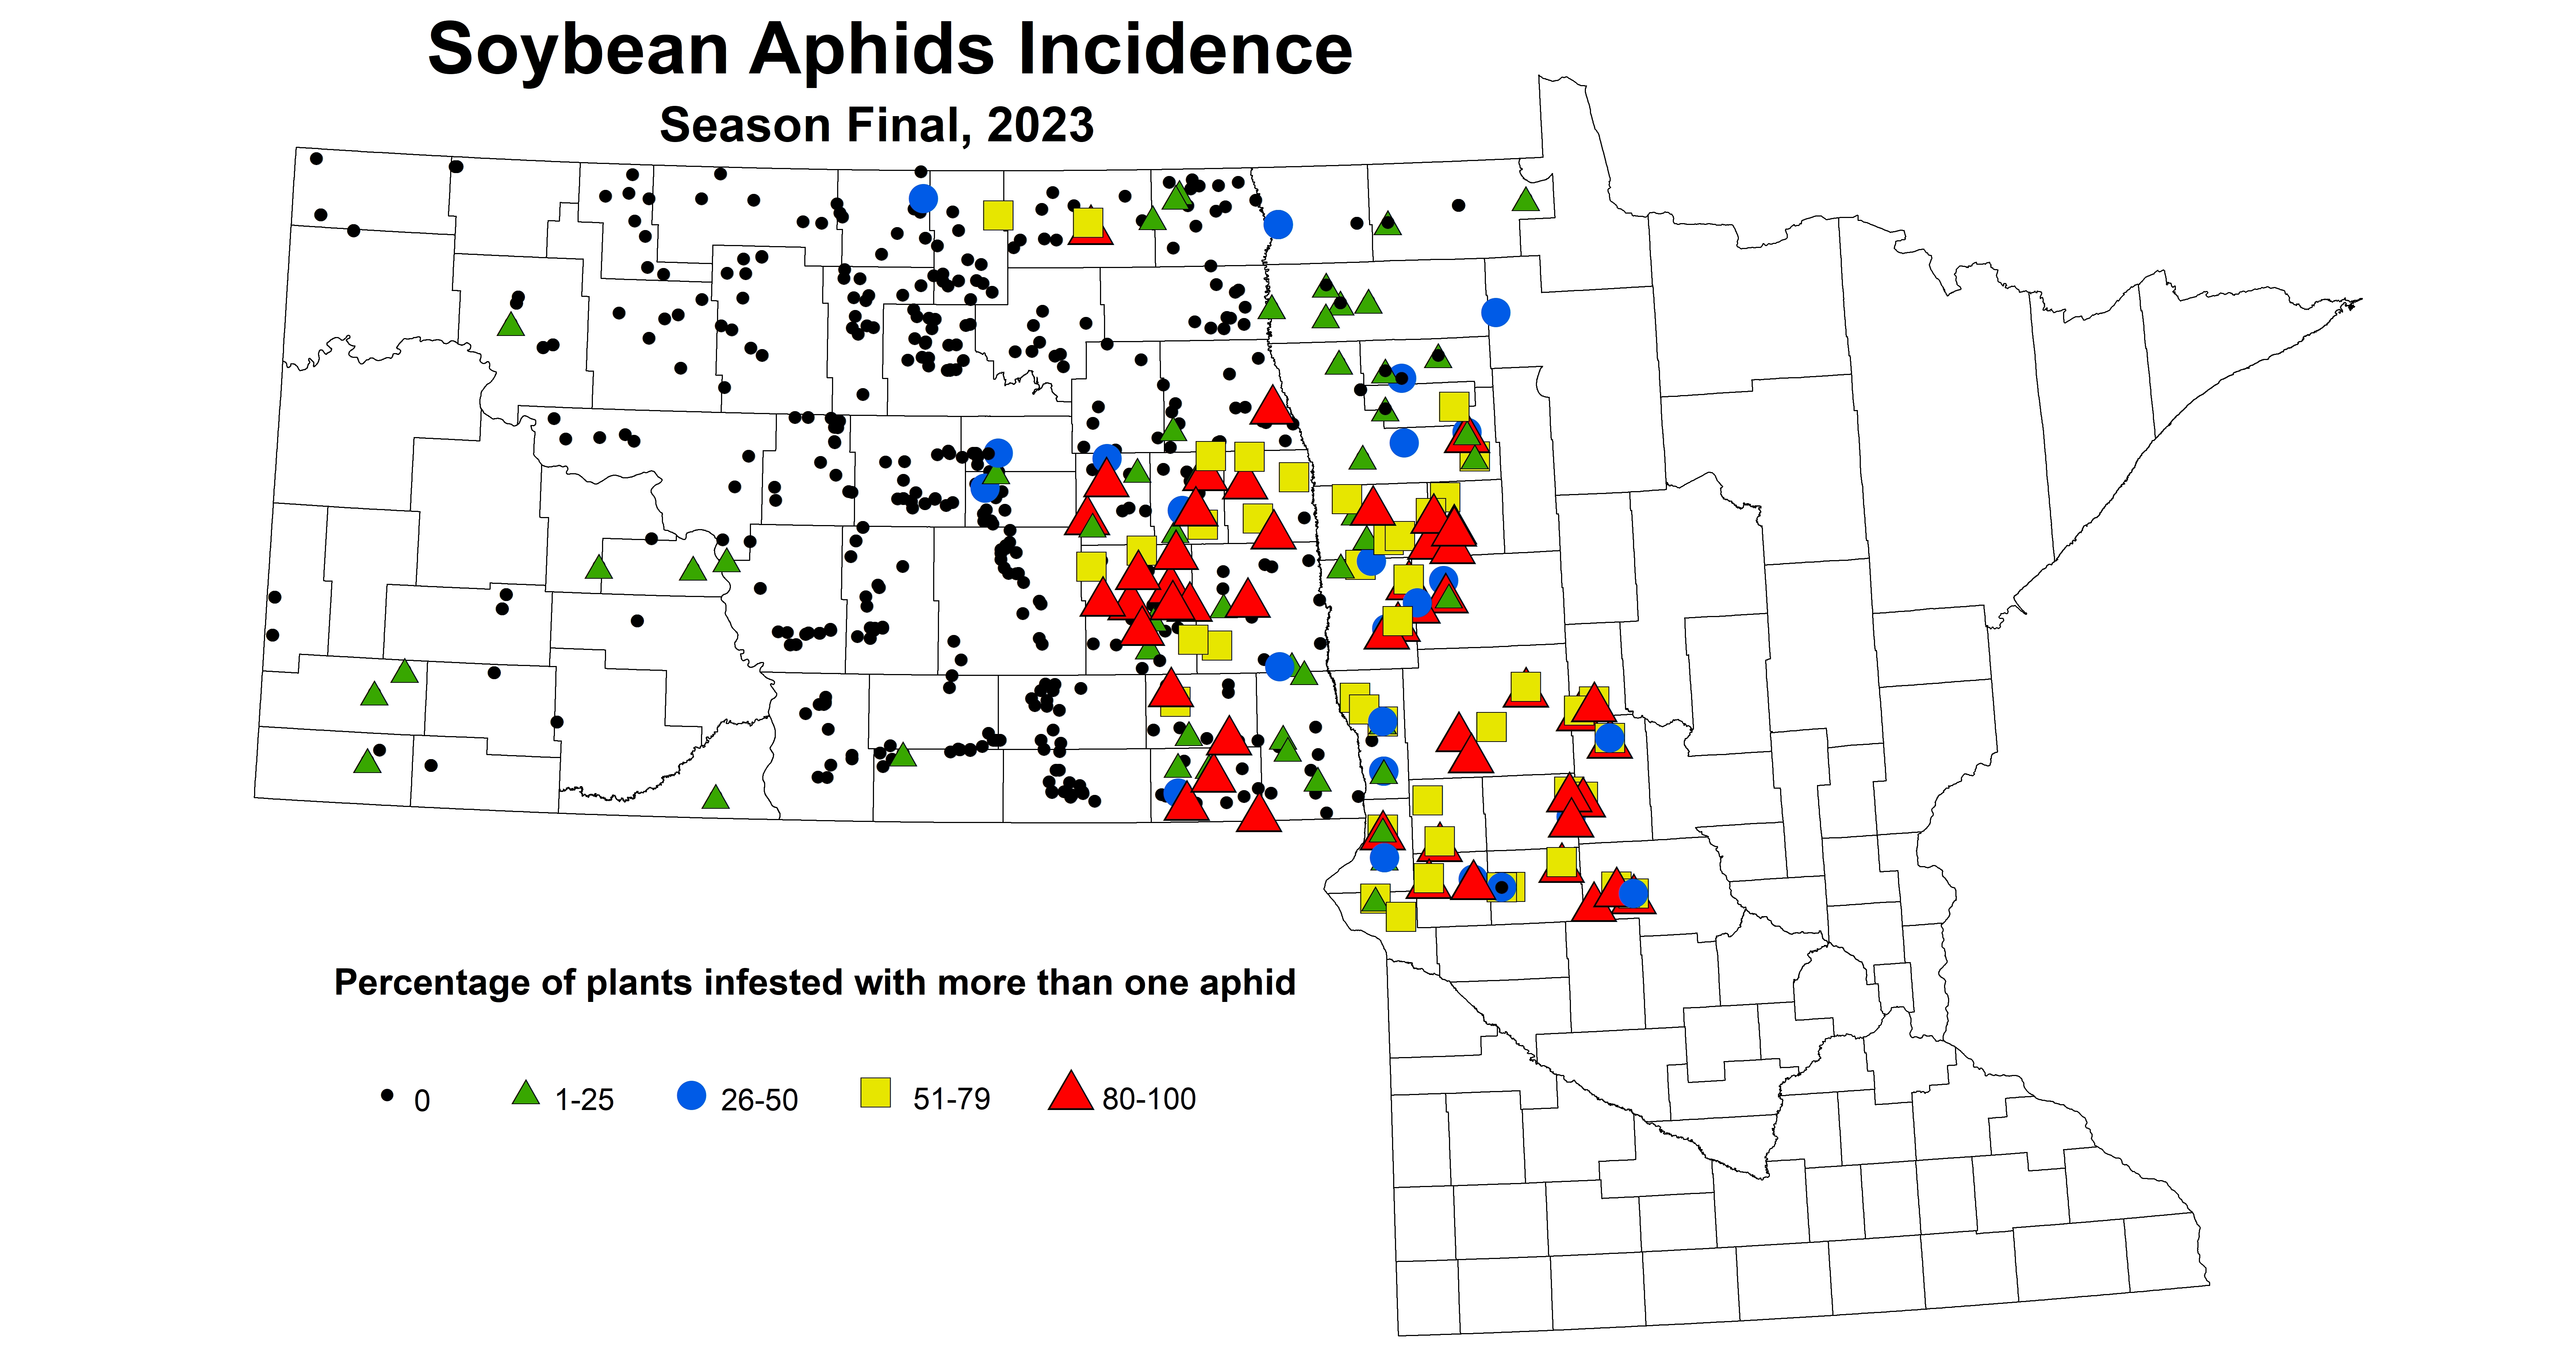 soybean aphids incidence season final 2023